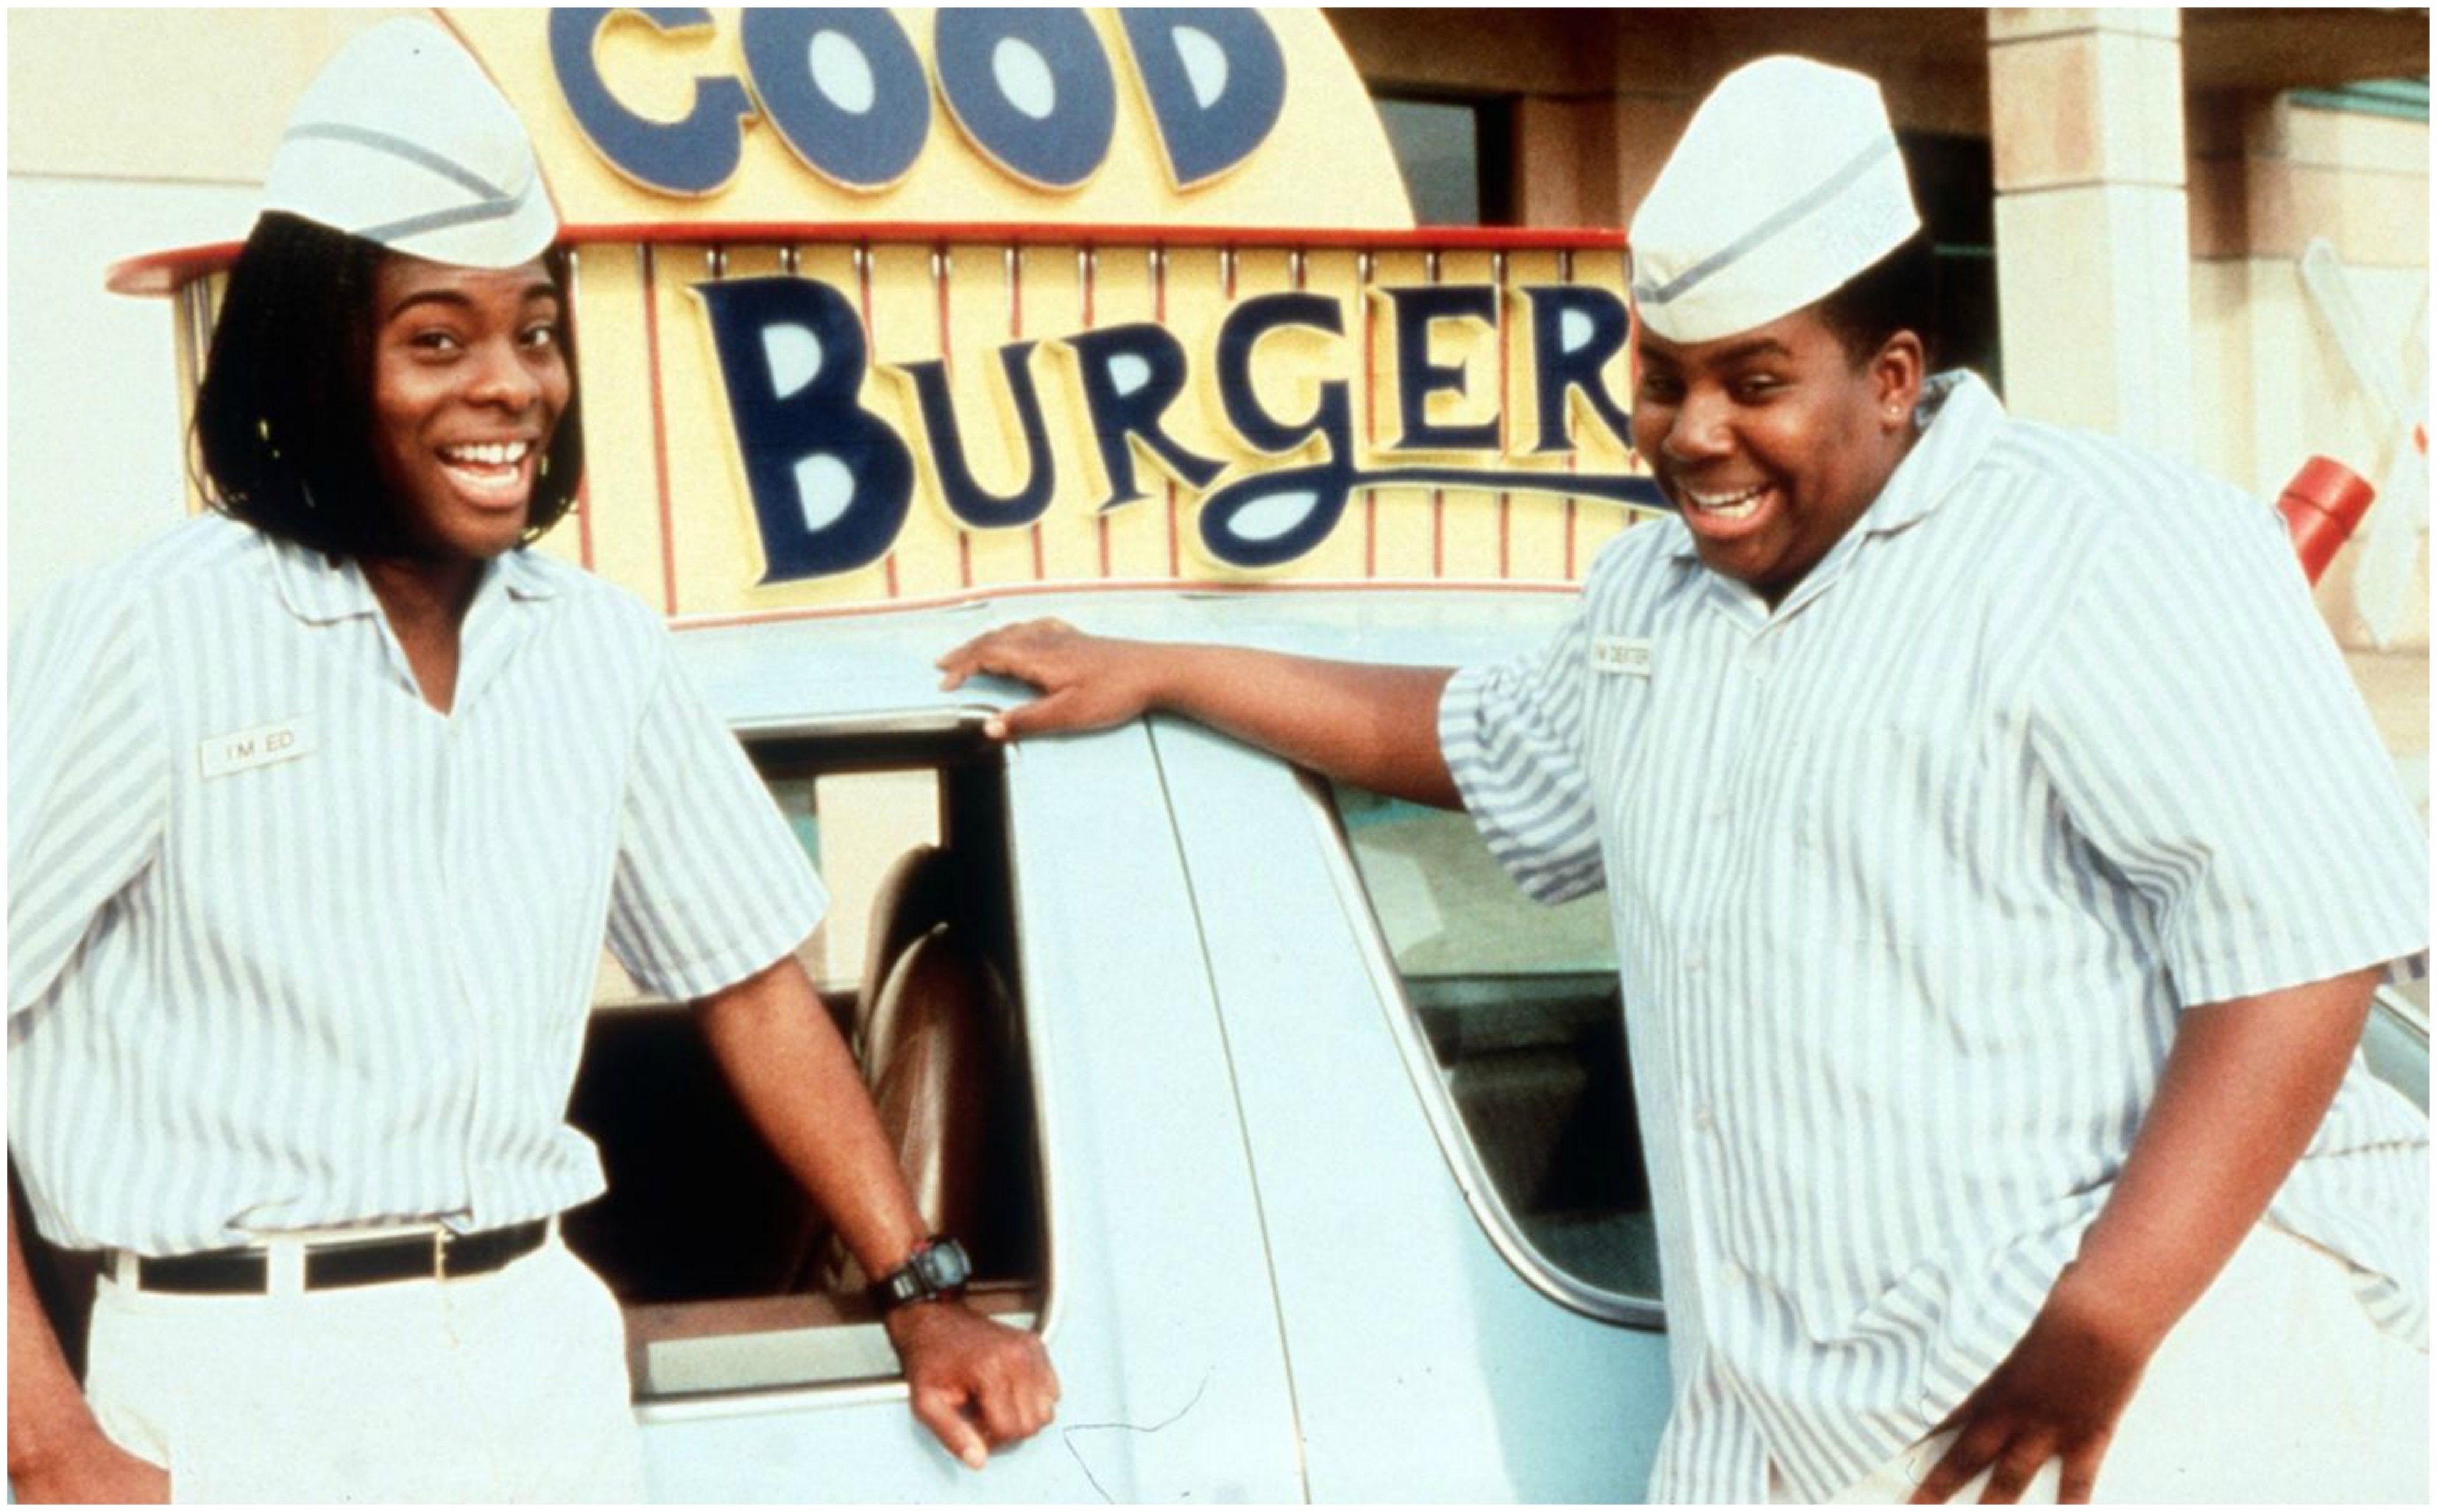 The Cast Of Good Burger Where Are They Now?